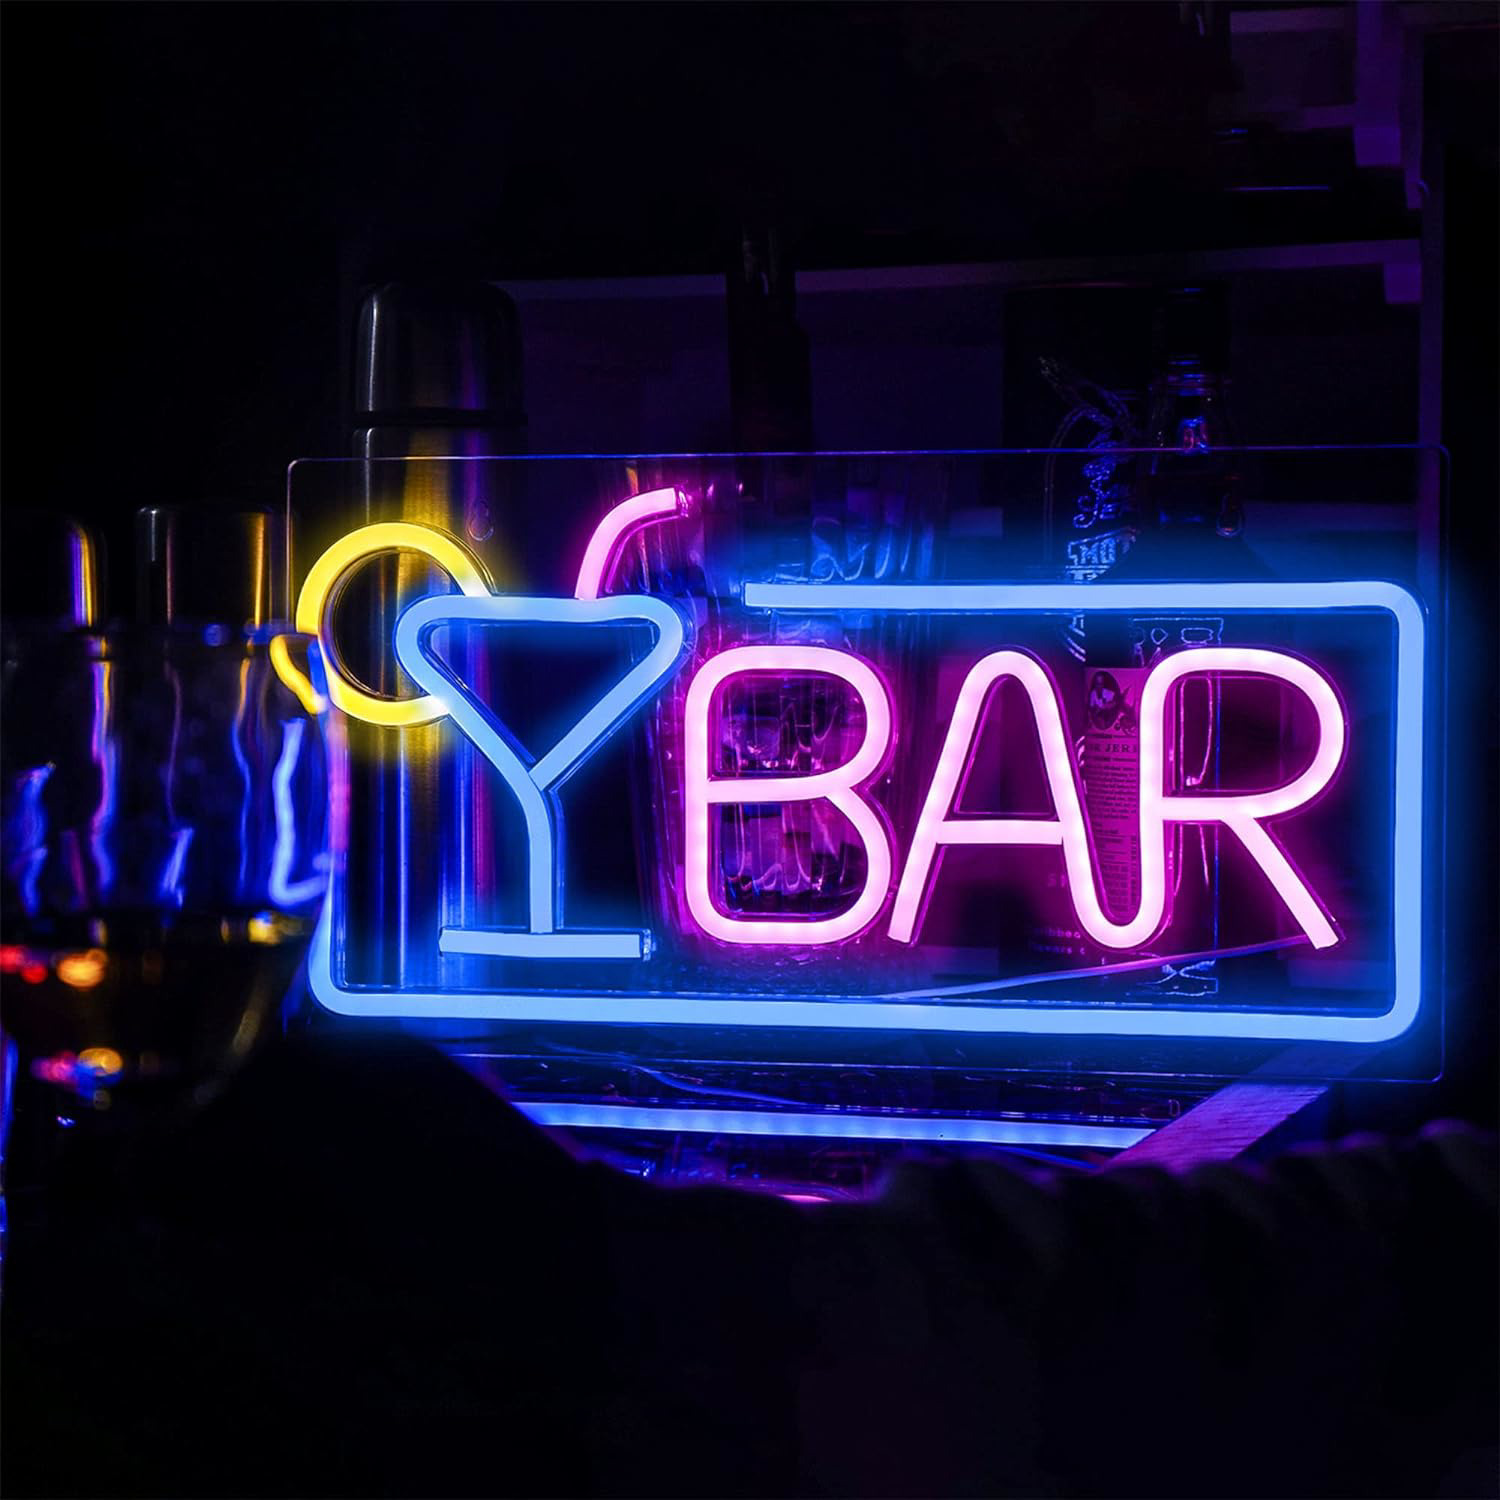 Leburry Neon Bar Signs - LED Bar Sign Made of Premium Acrylic - Glowing Neon Ba